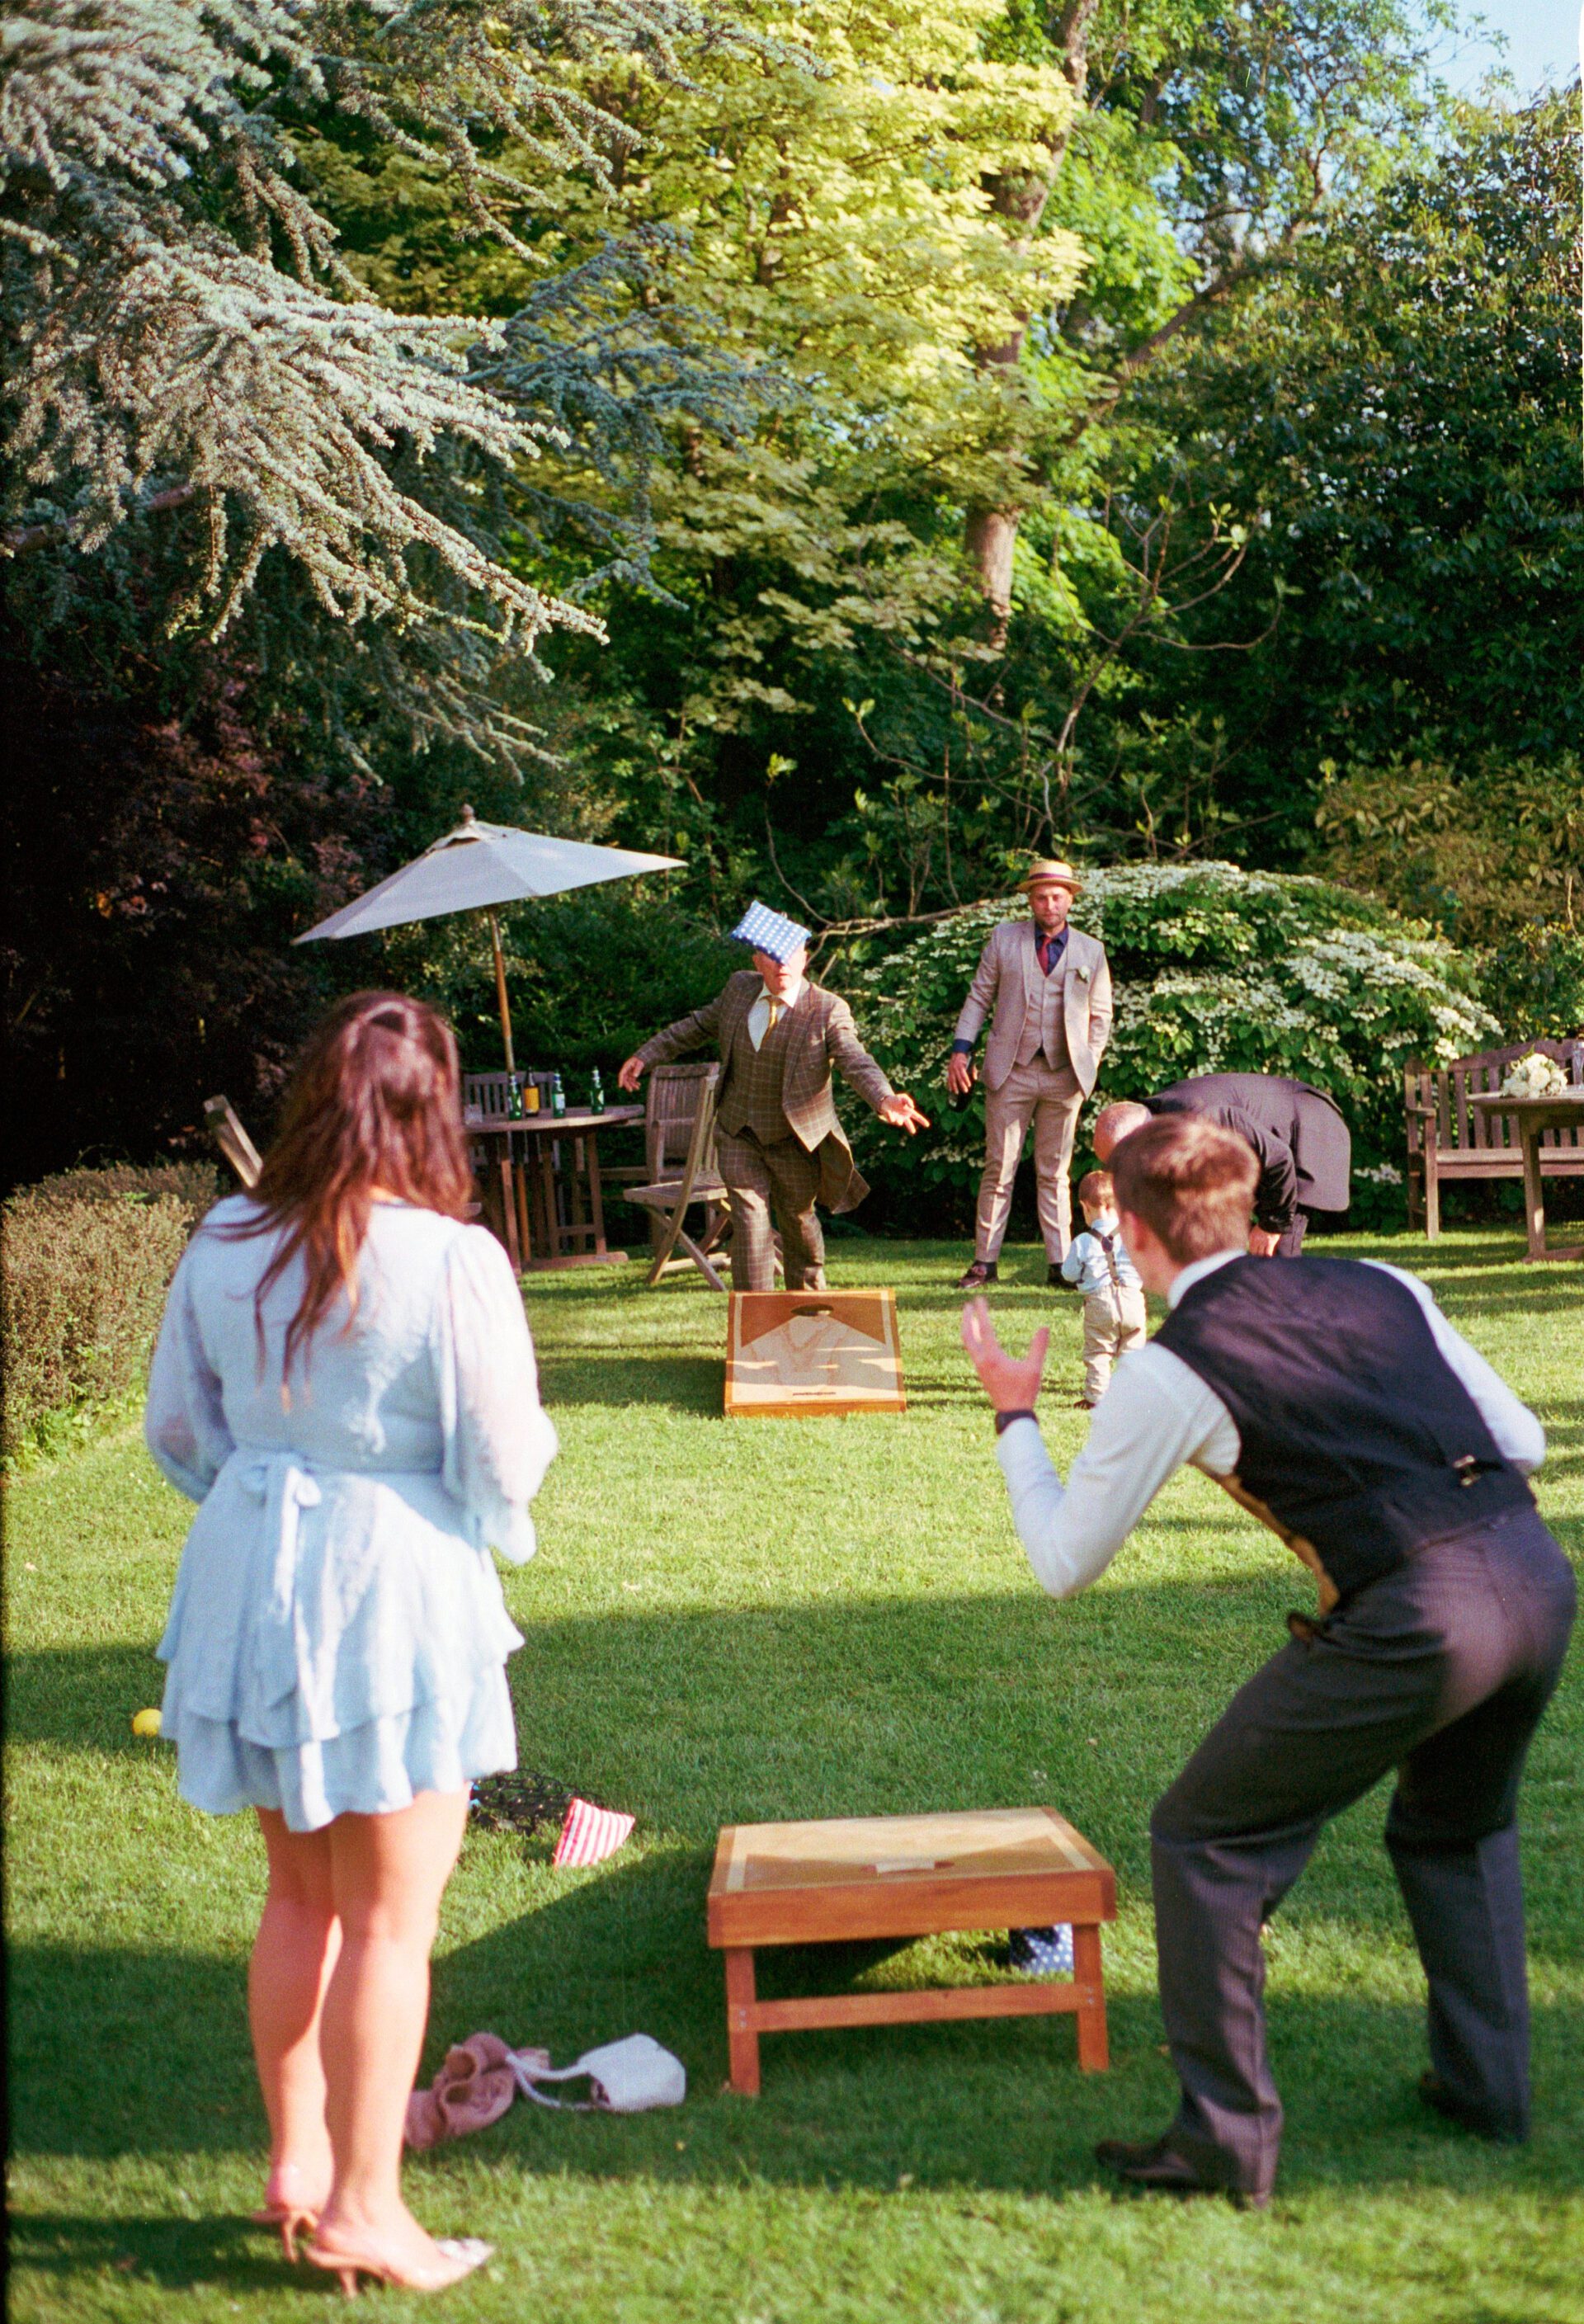 Wedding guests enjoy garden games at Old Luxters barn, captured on 35mm film